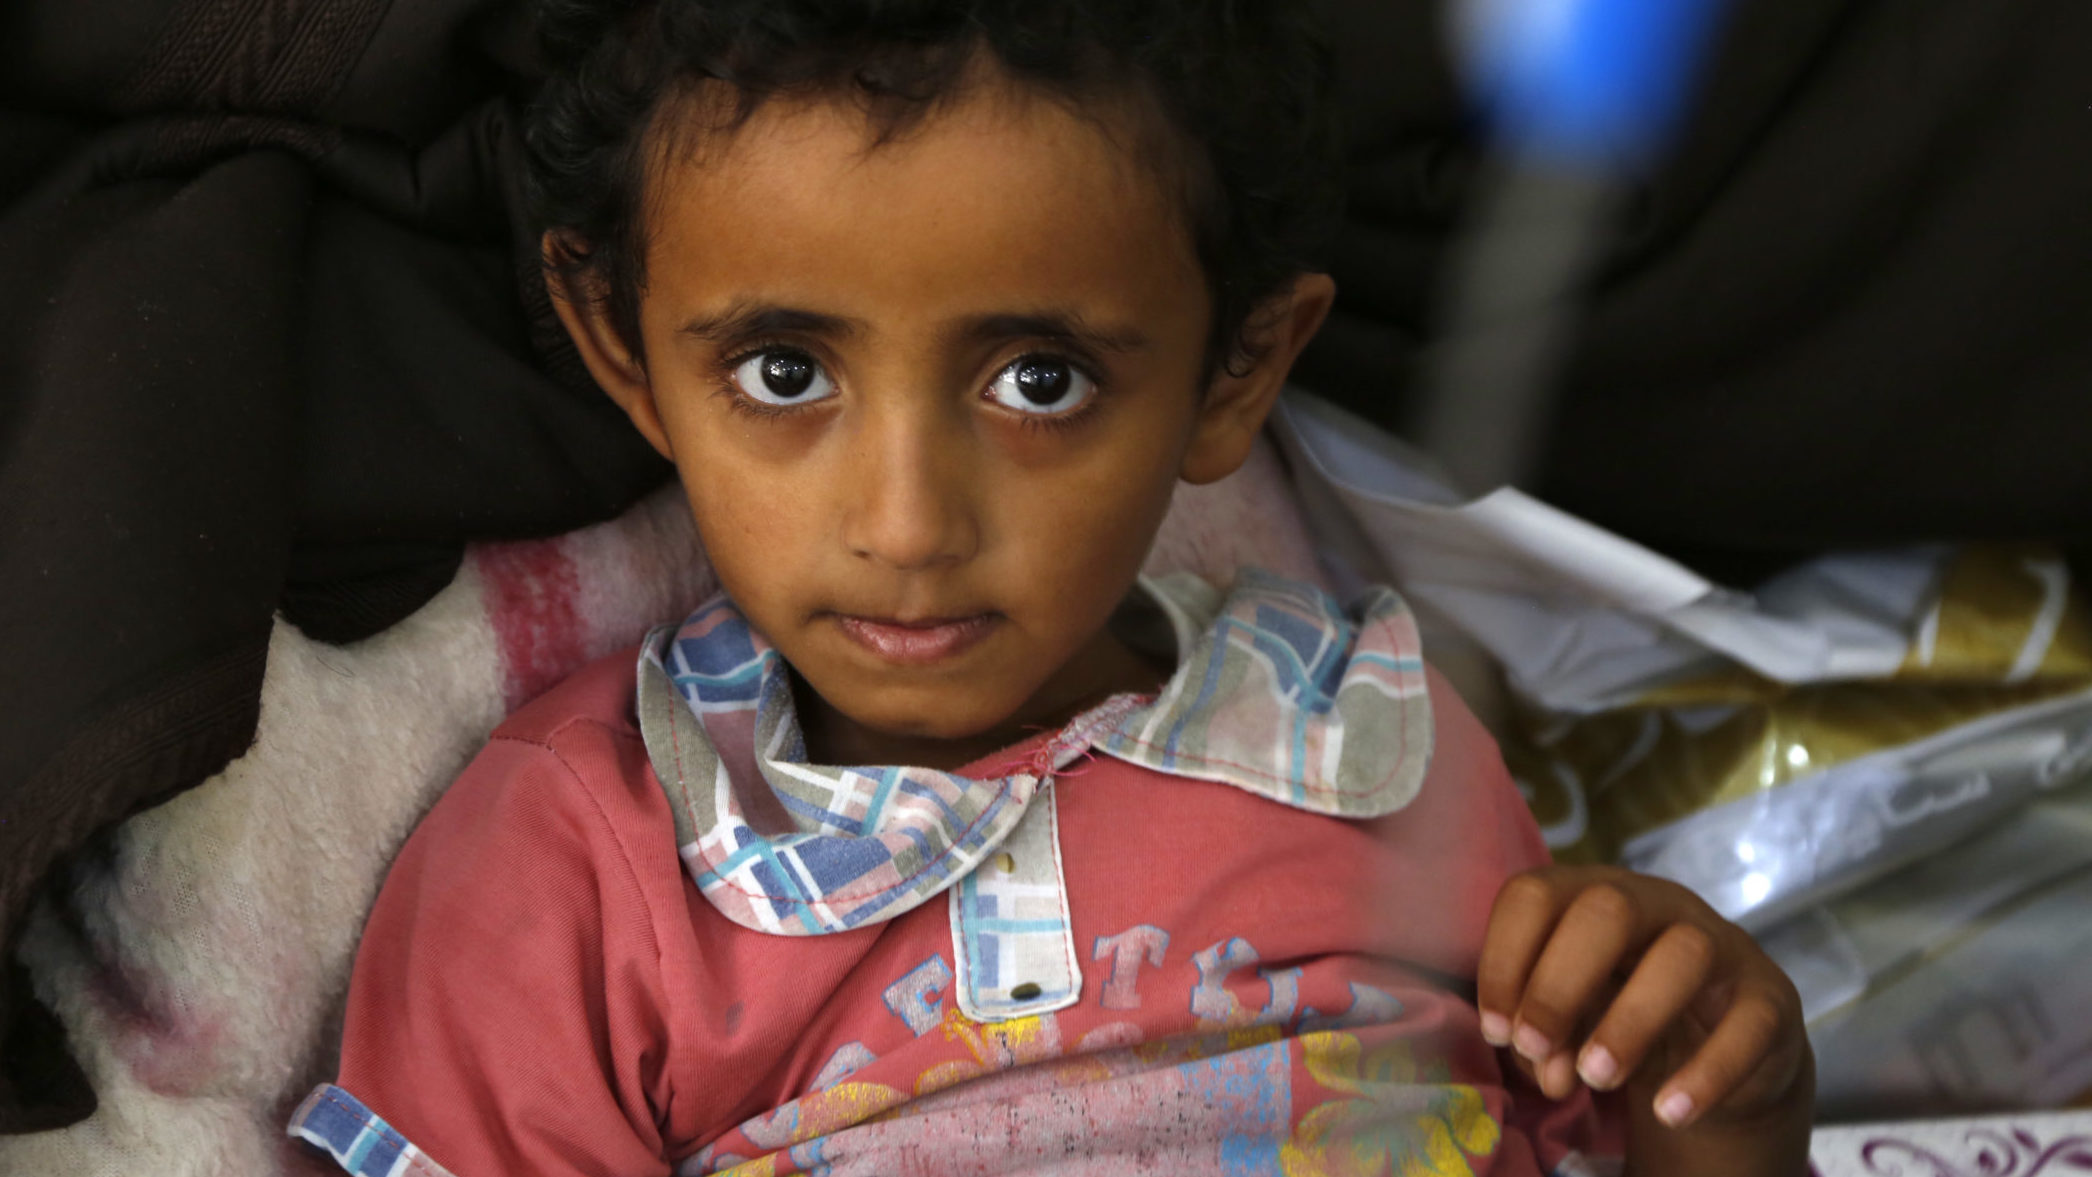 UN Official: Yemenis ‘Being Starved,’ not Going Hungry